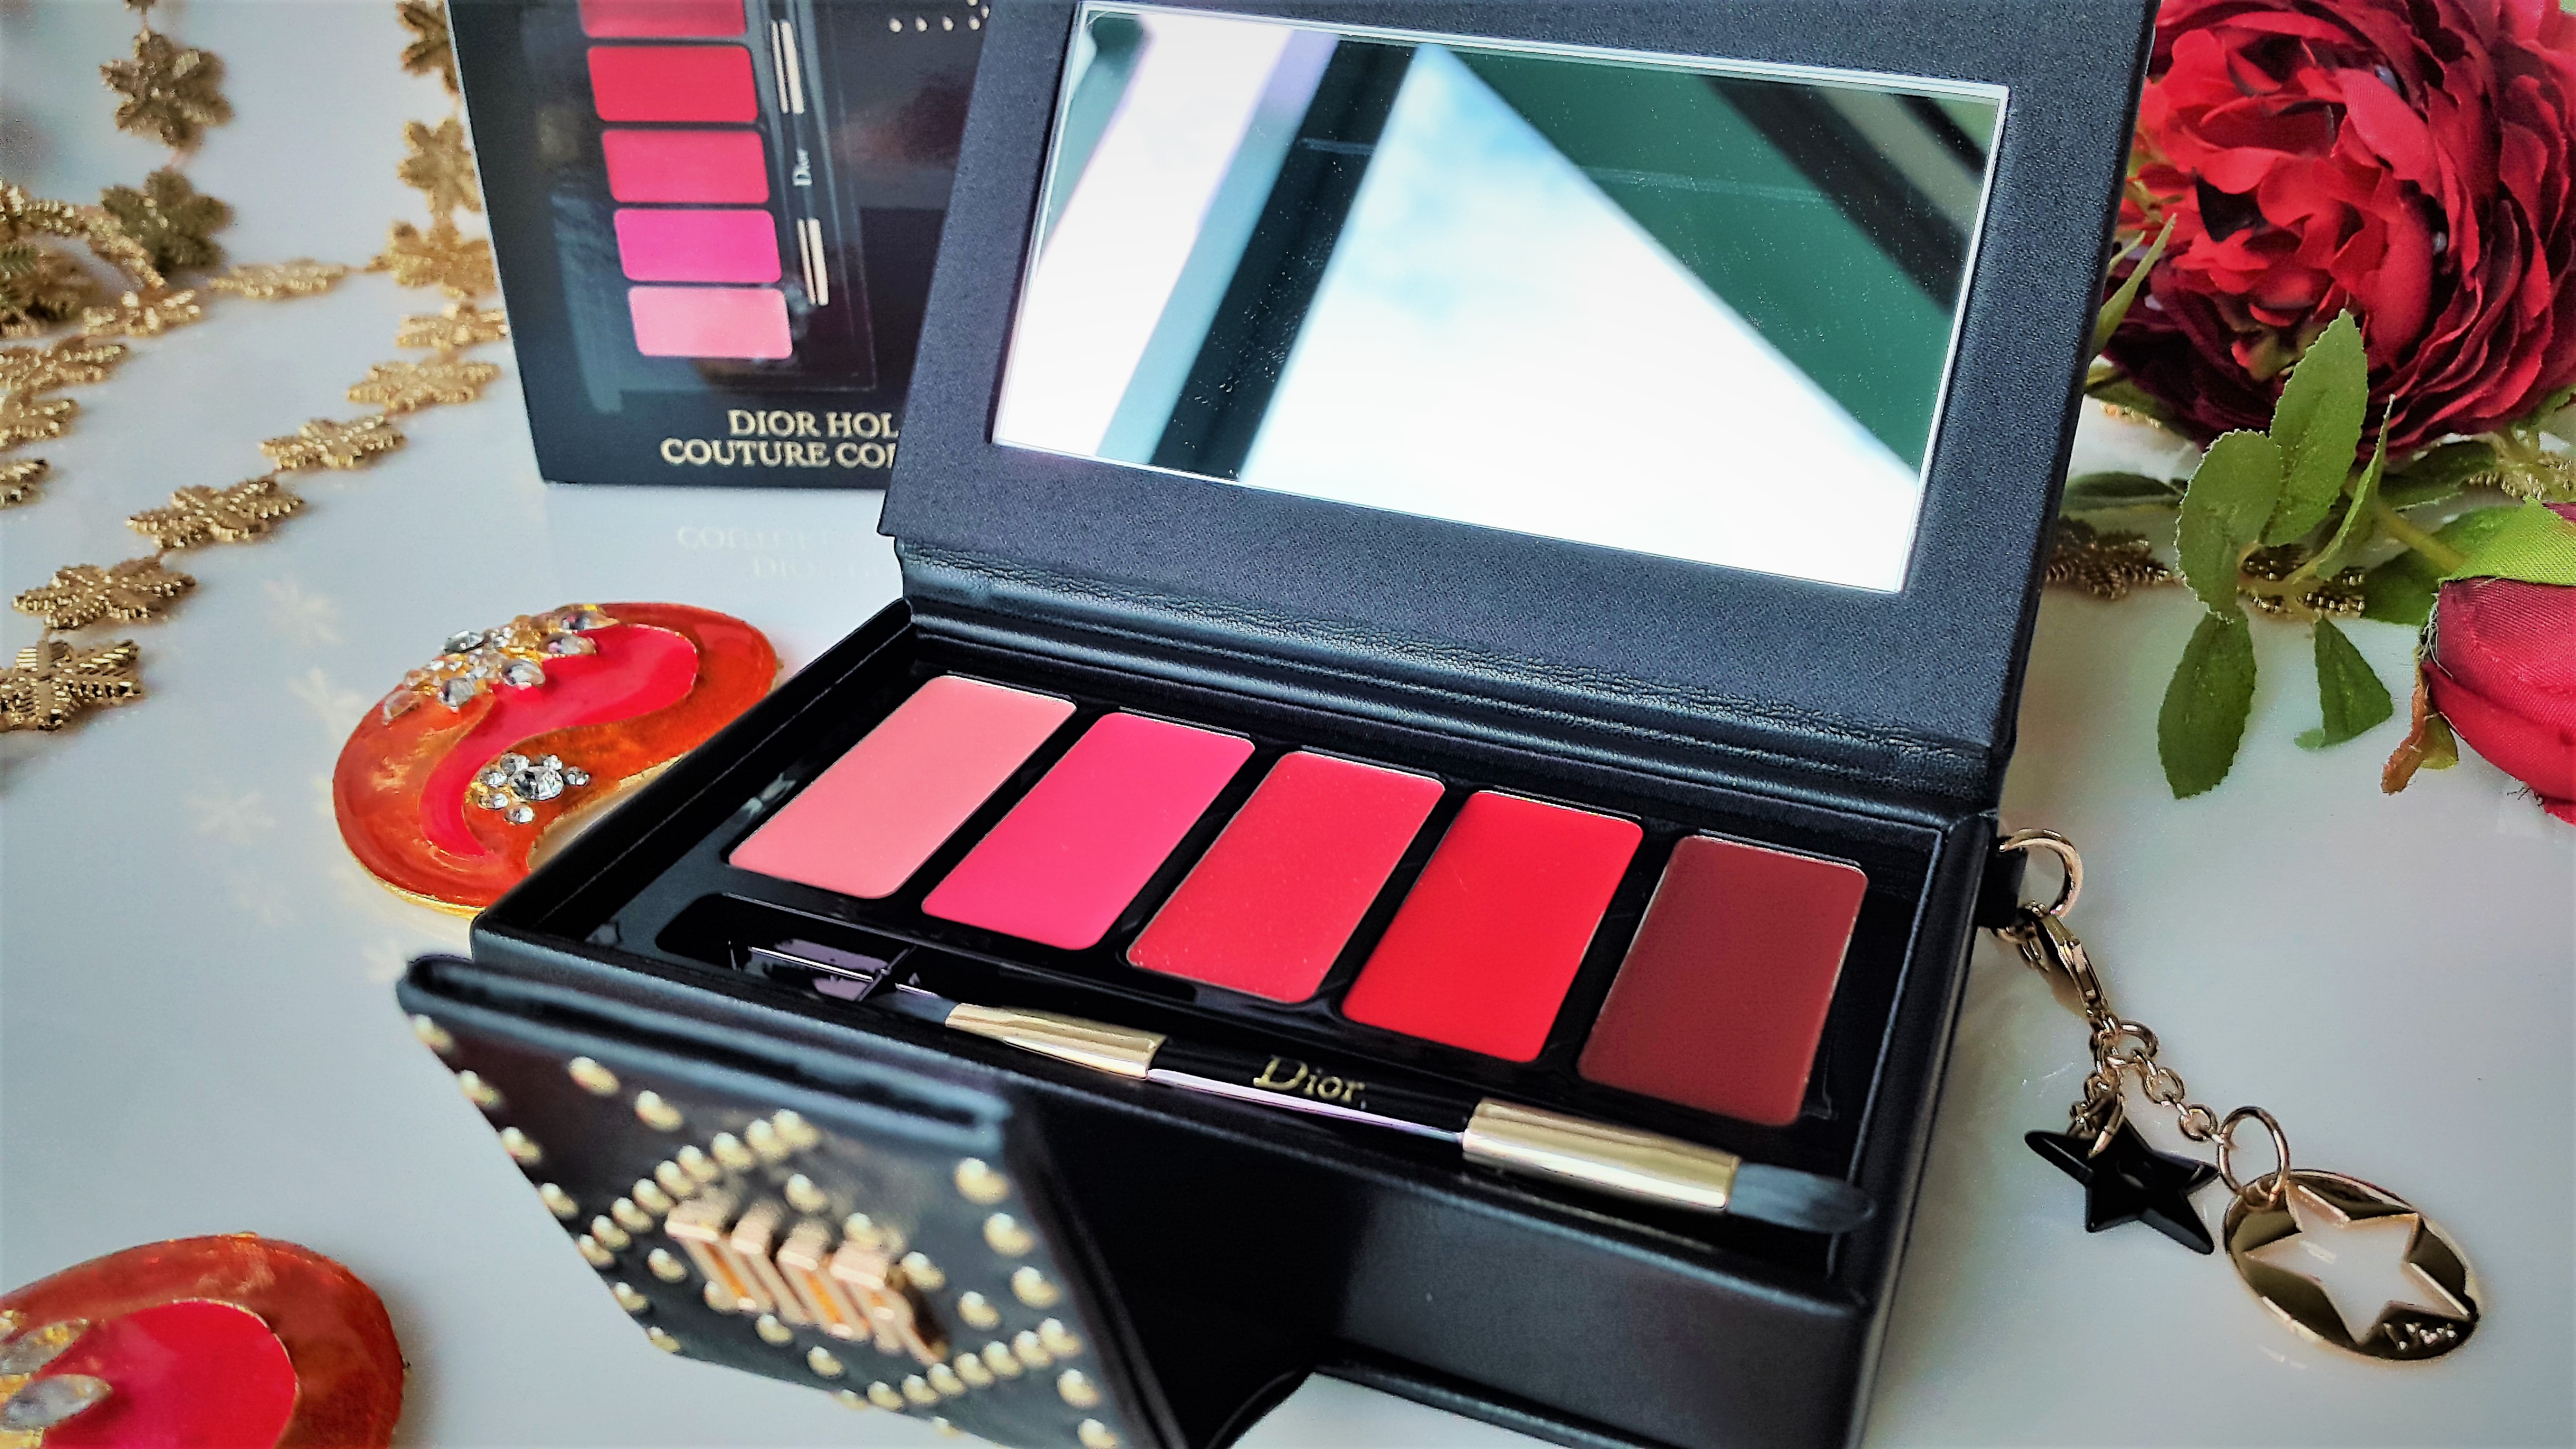 dior holiday couture collection price